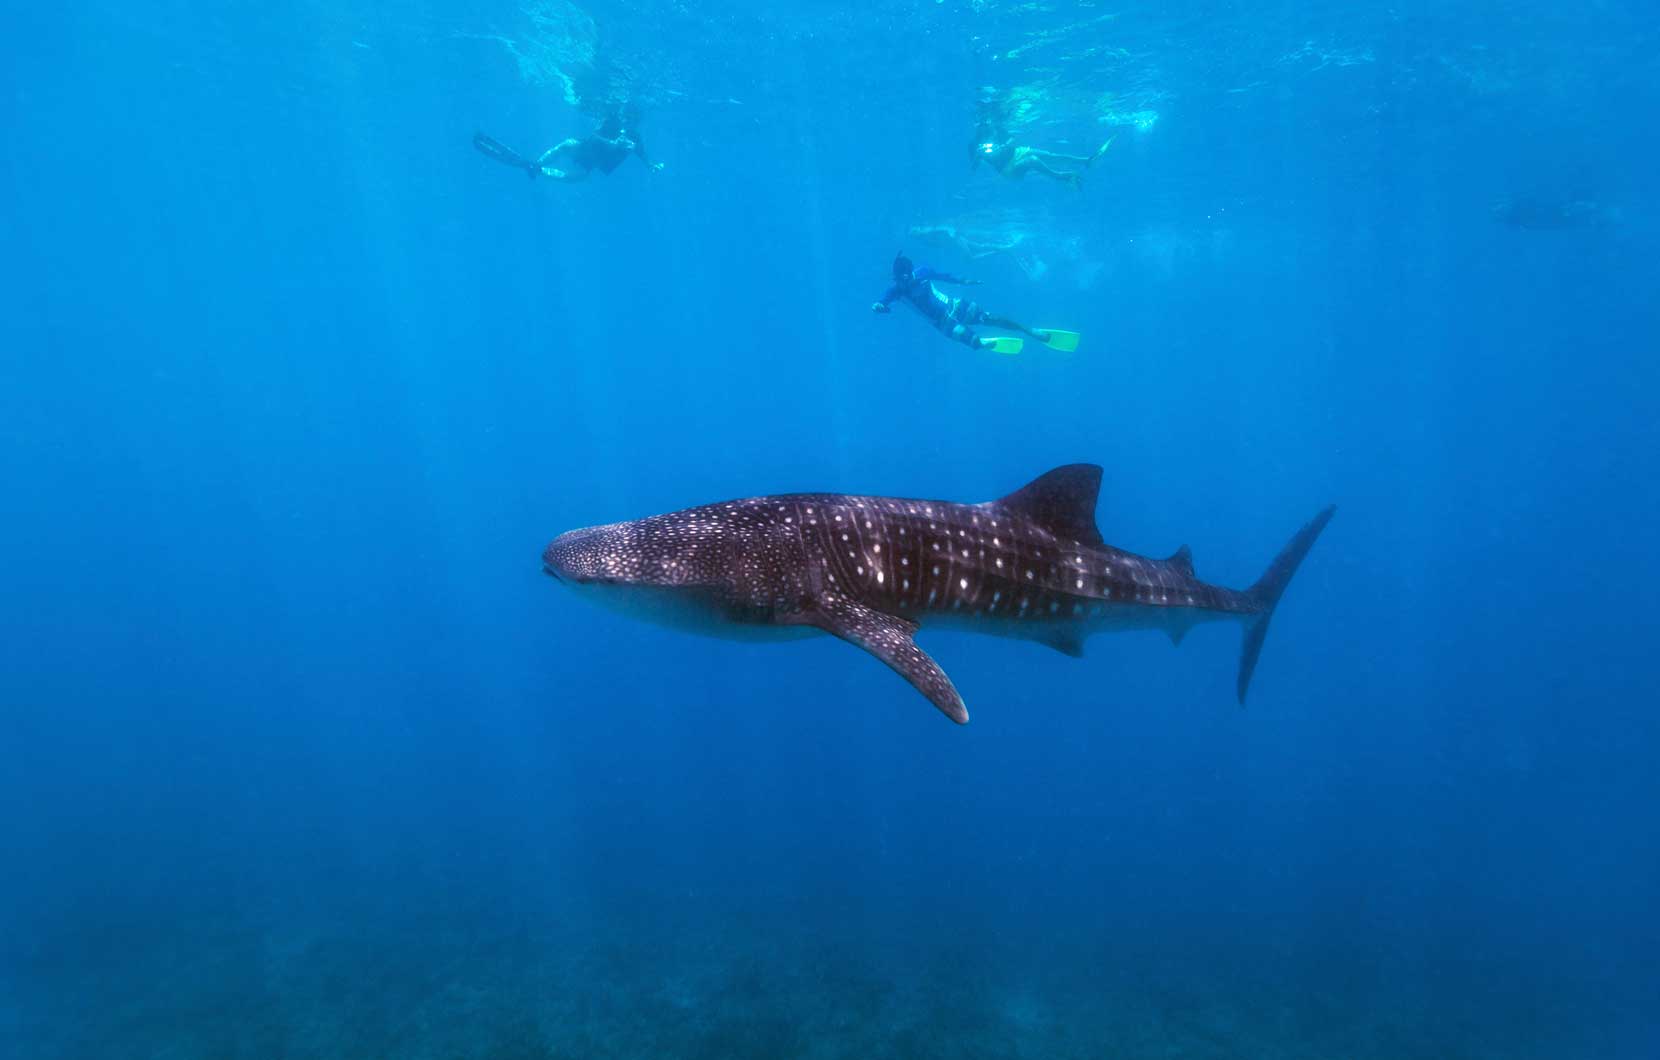 Gentle giants, whale sharks are not dangerous to humans.